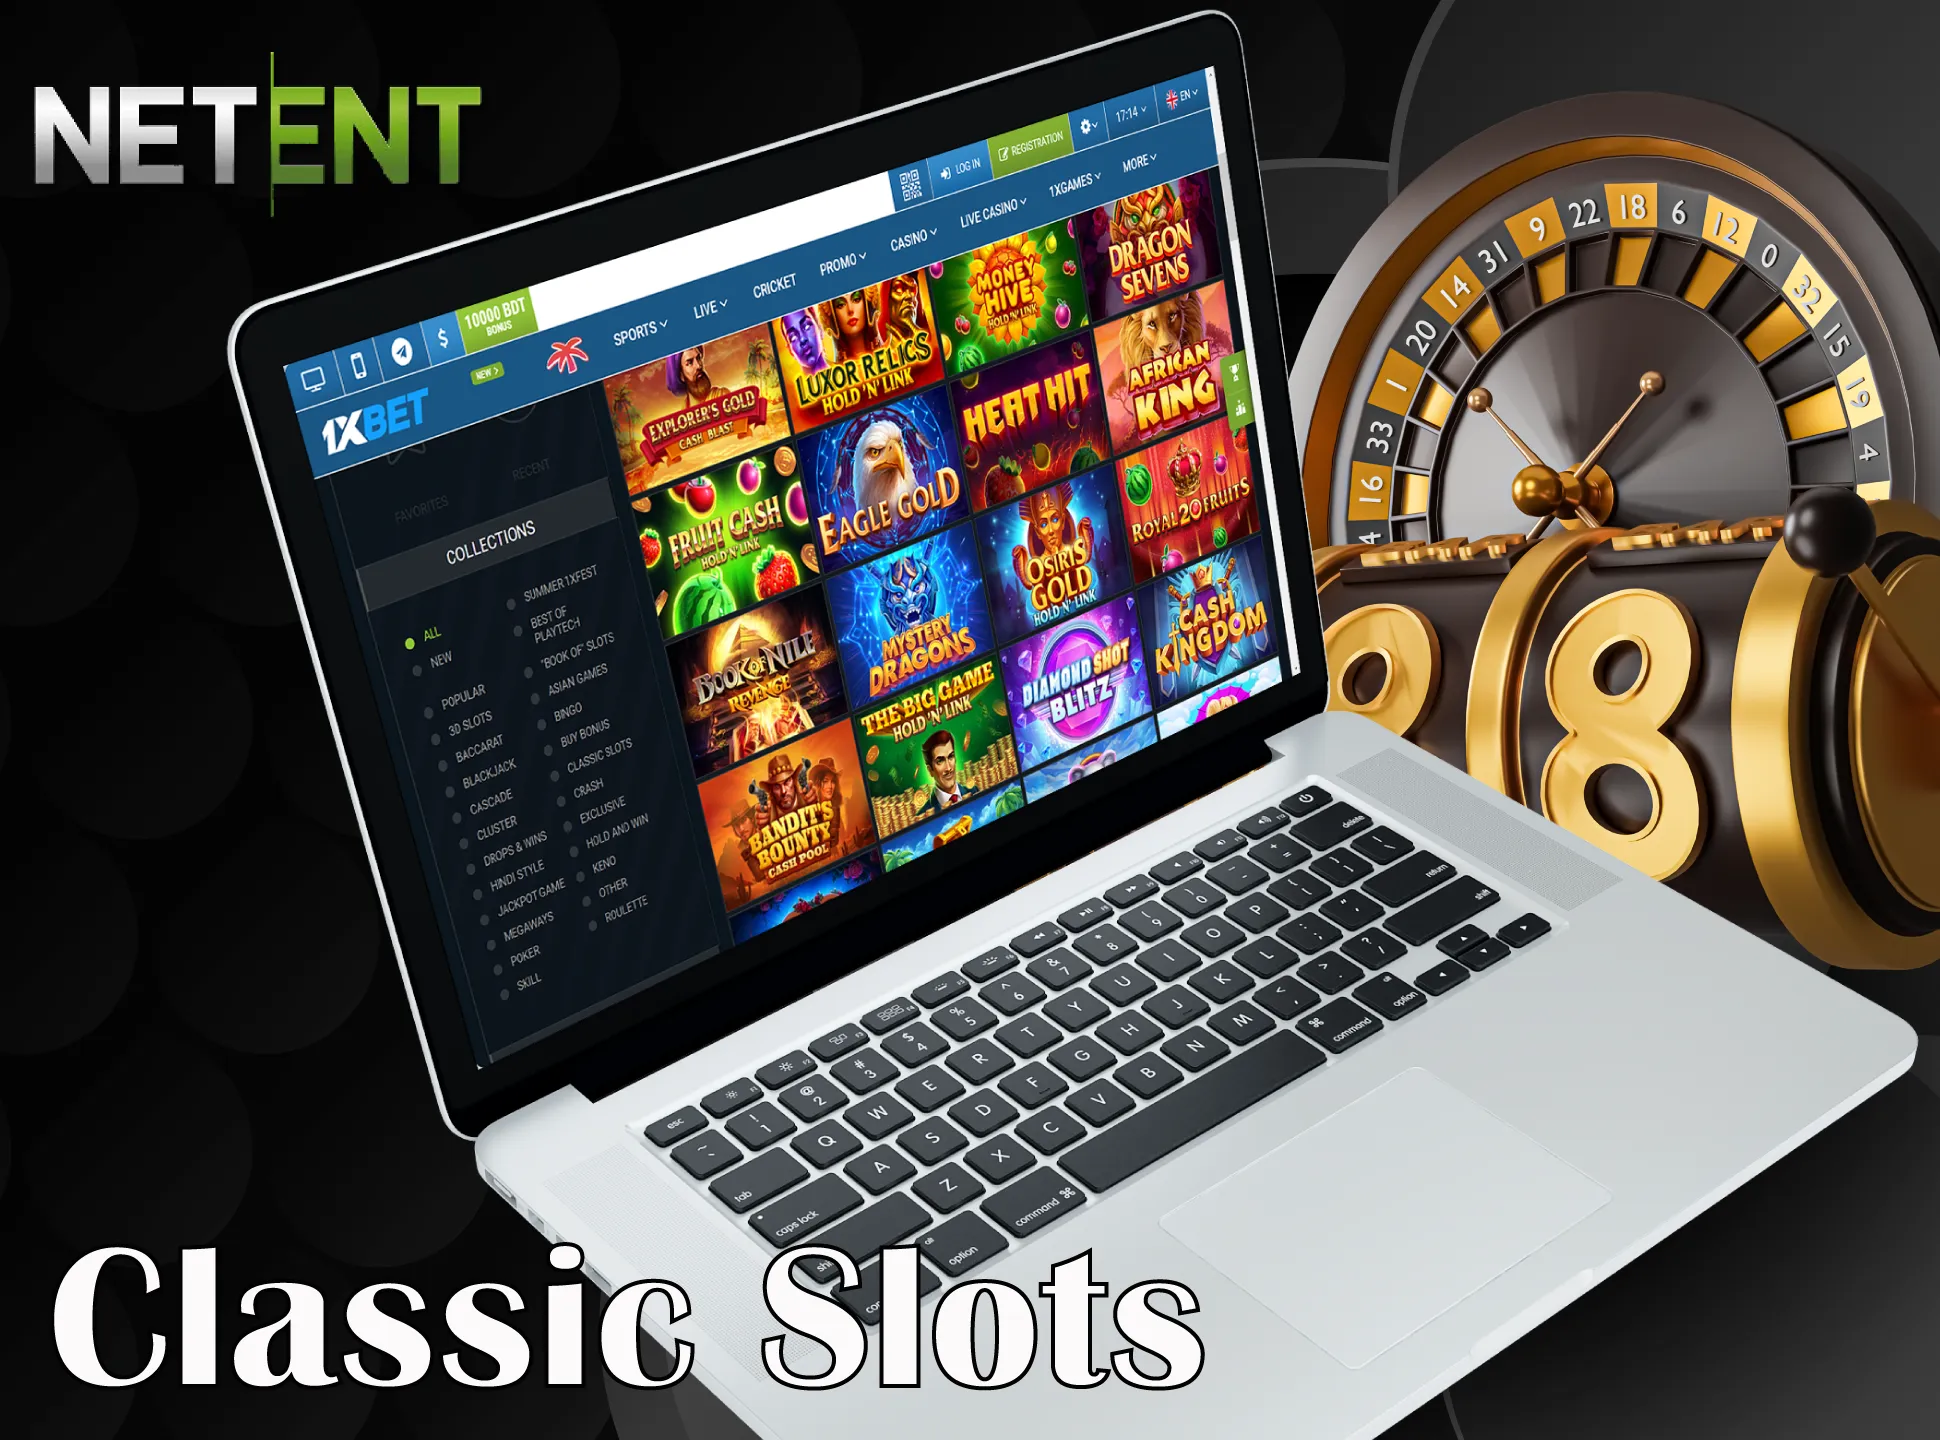 These are the most well-known slots from NetEnt.